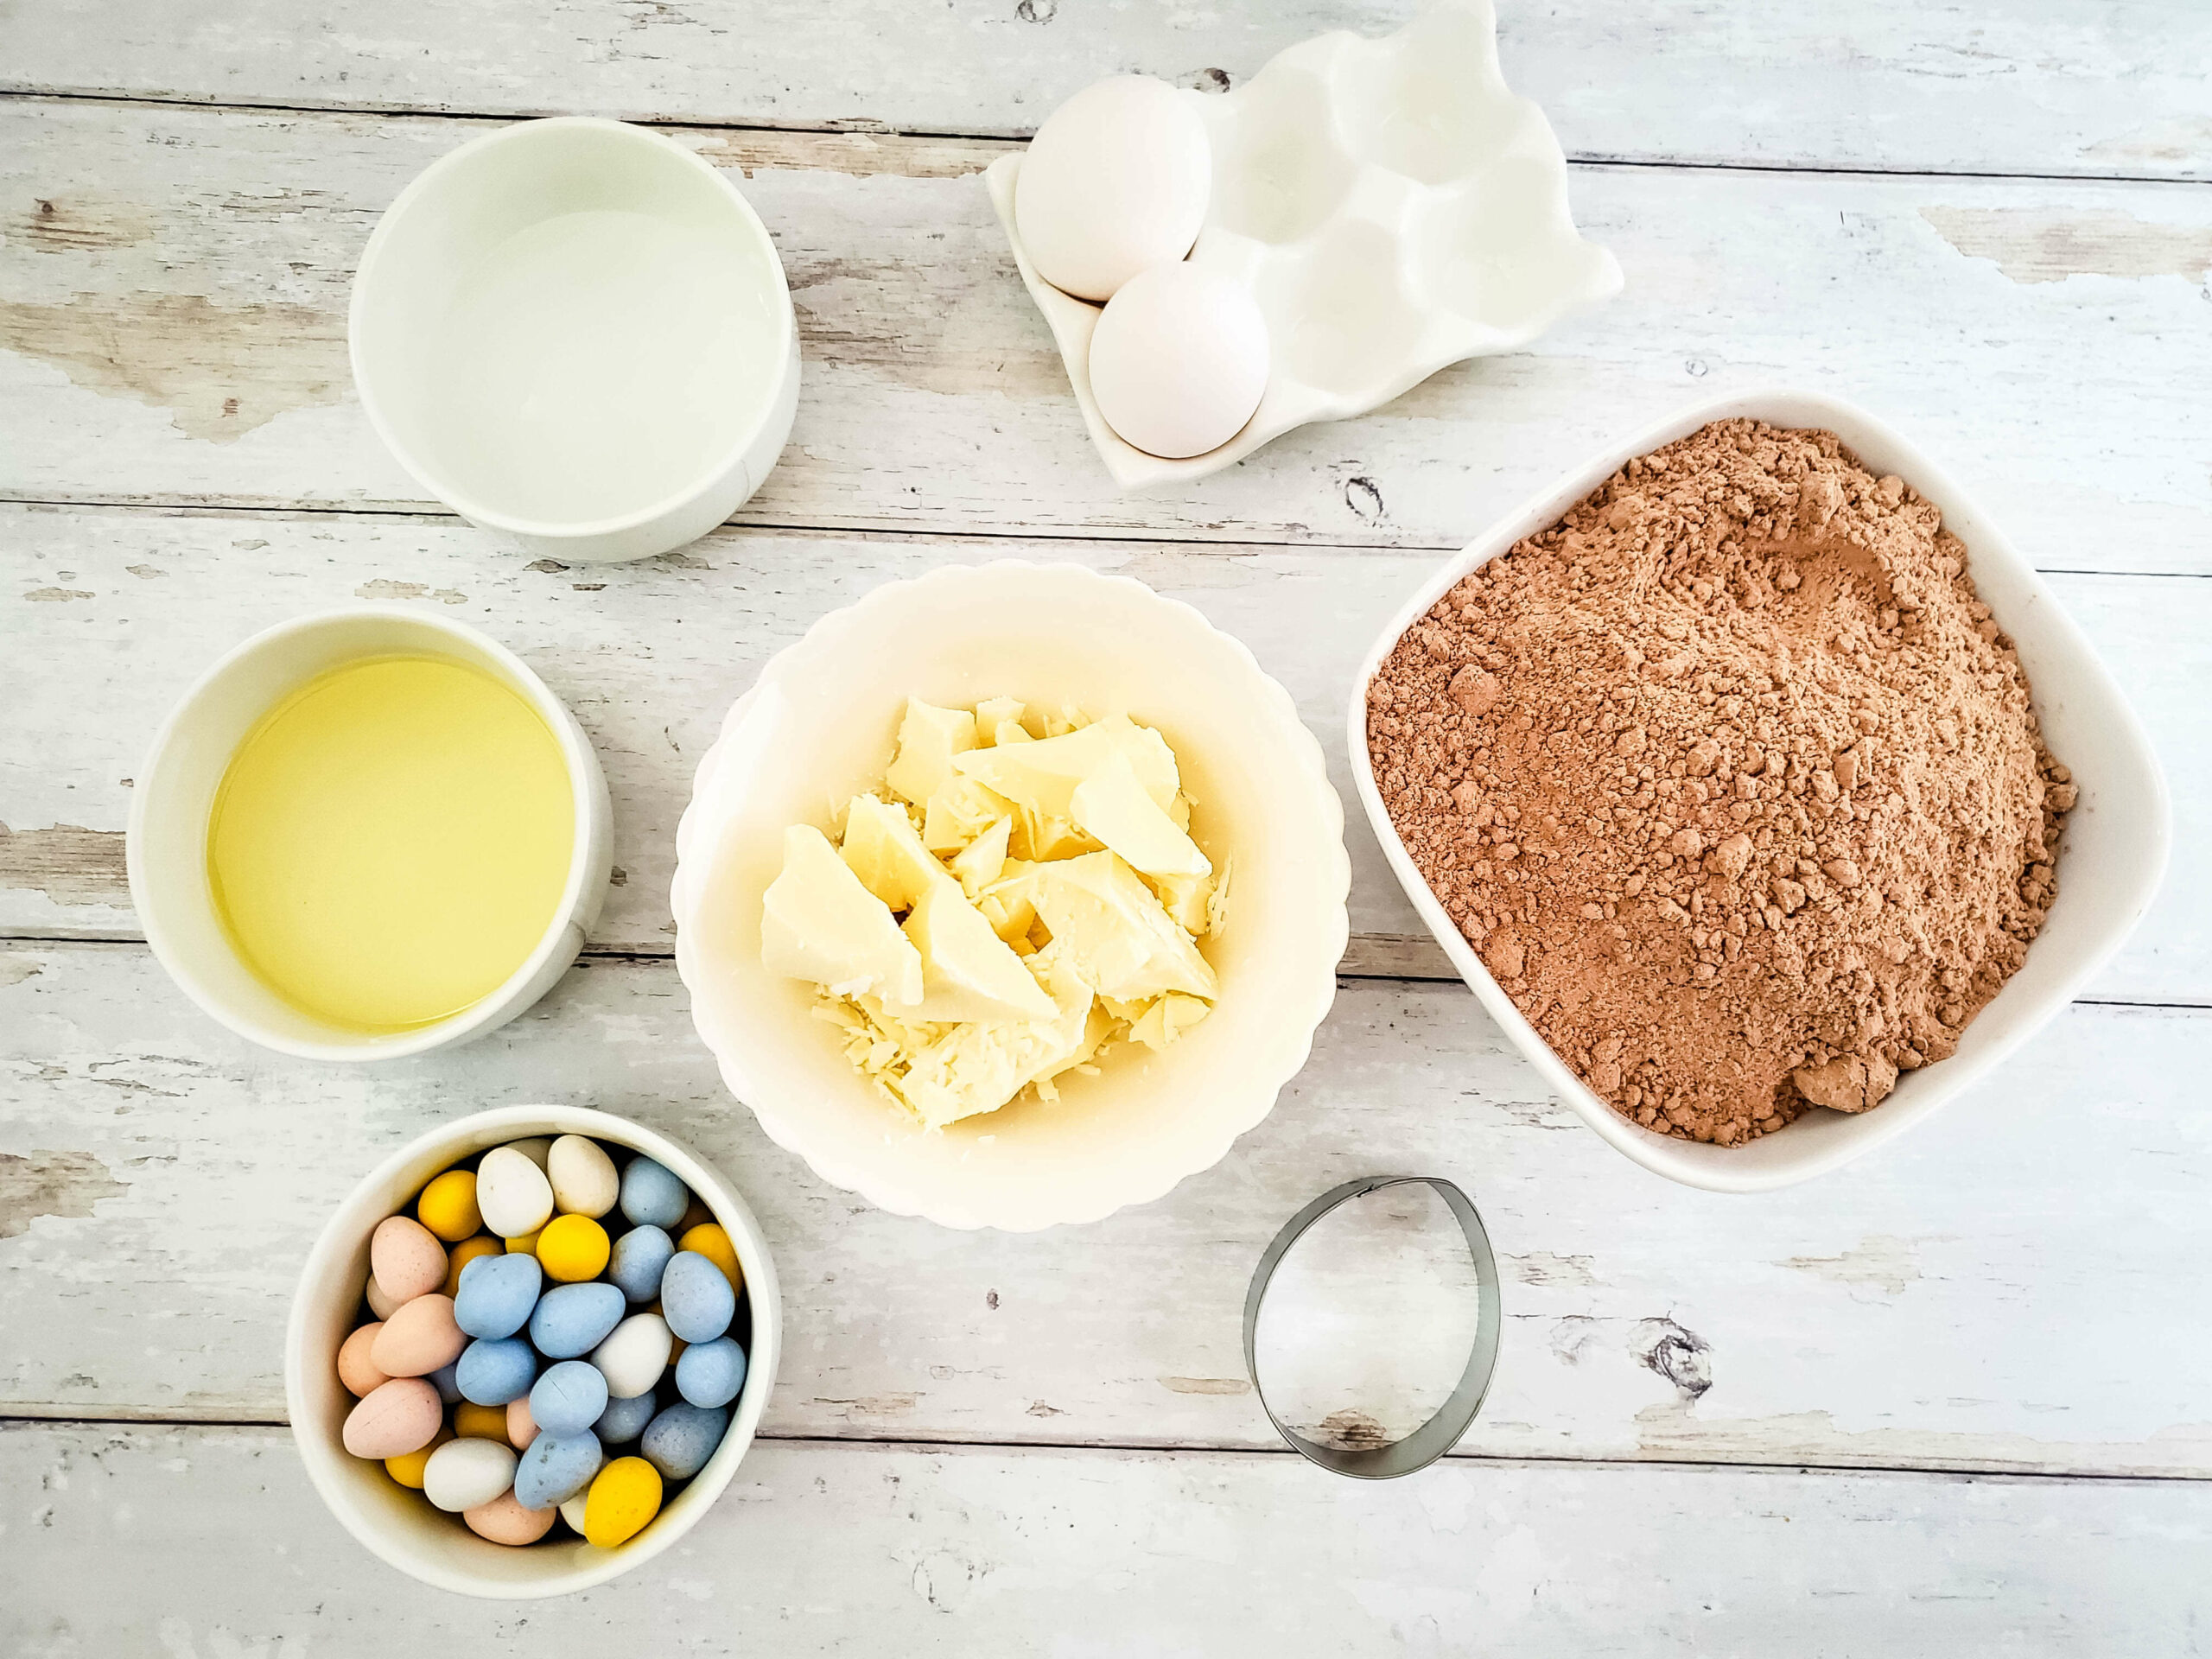 Ingredients for baking Easter brownies arranged on a wooden surface, including eggs, flour, butter, sugar, milk, and candy eggs.